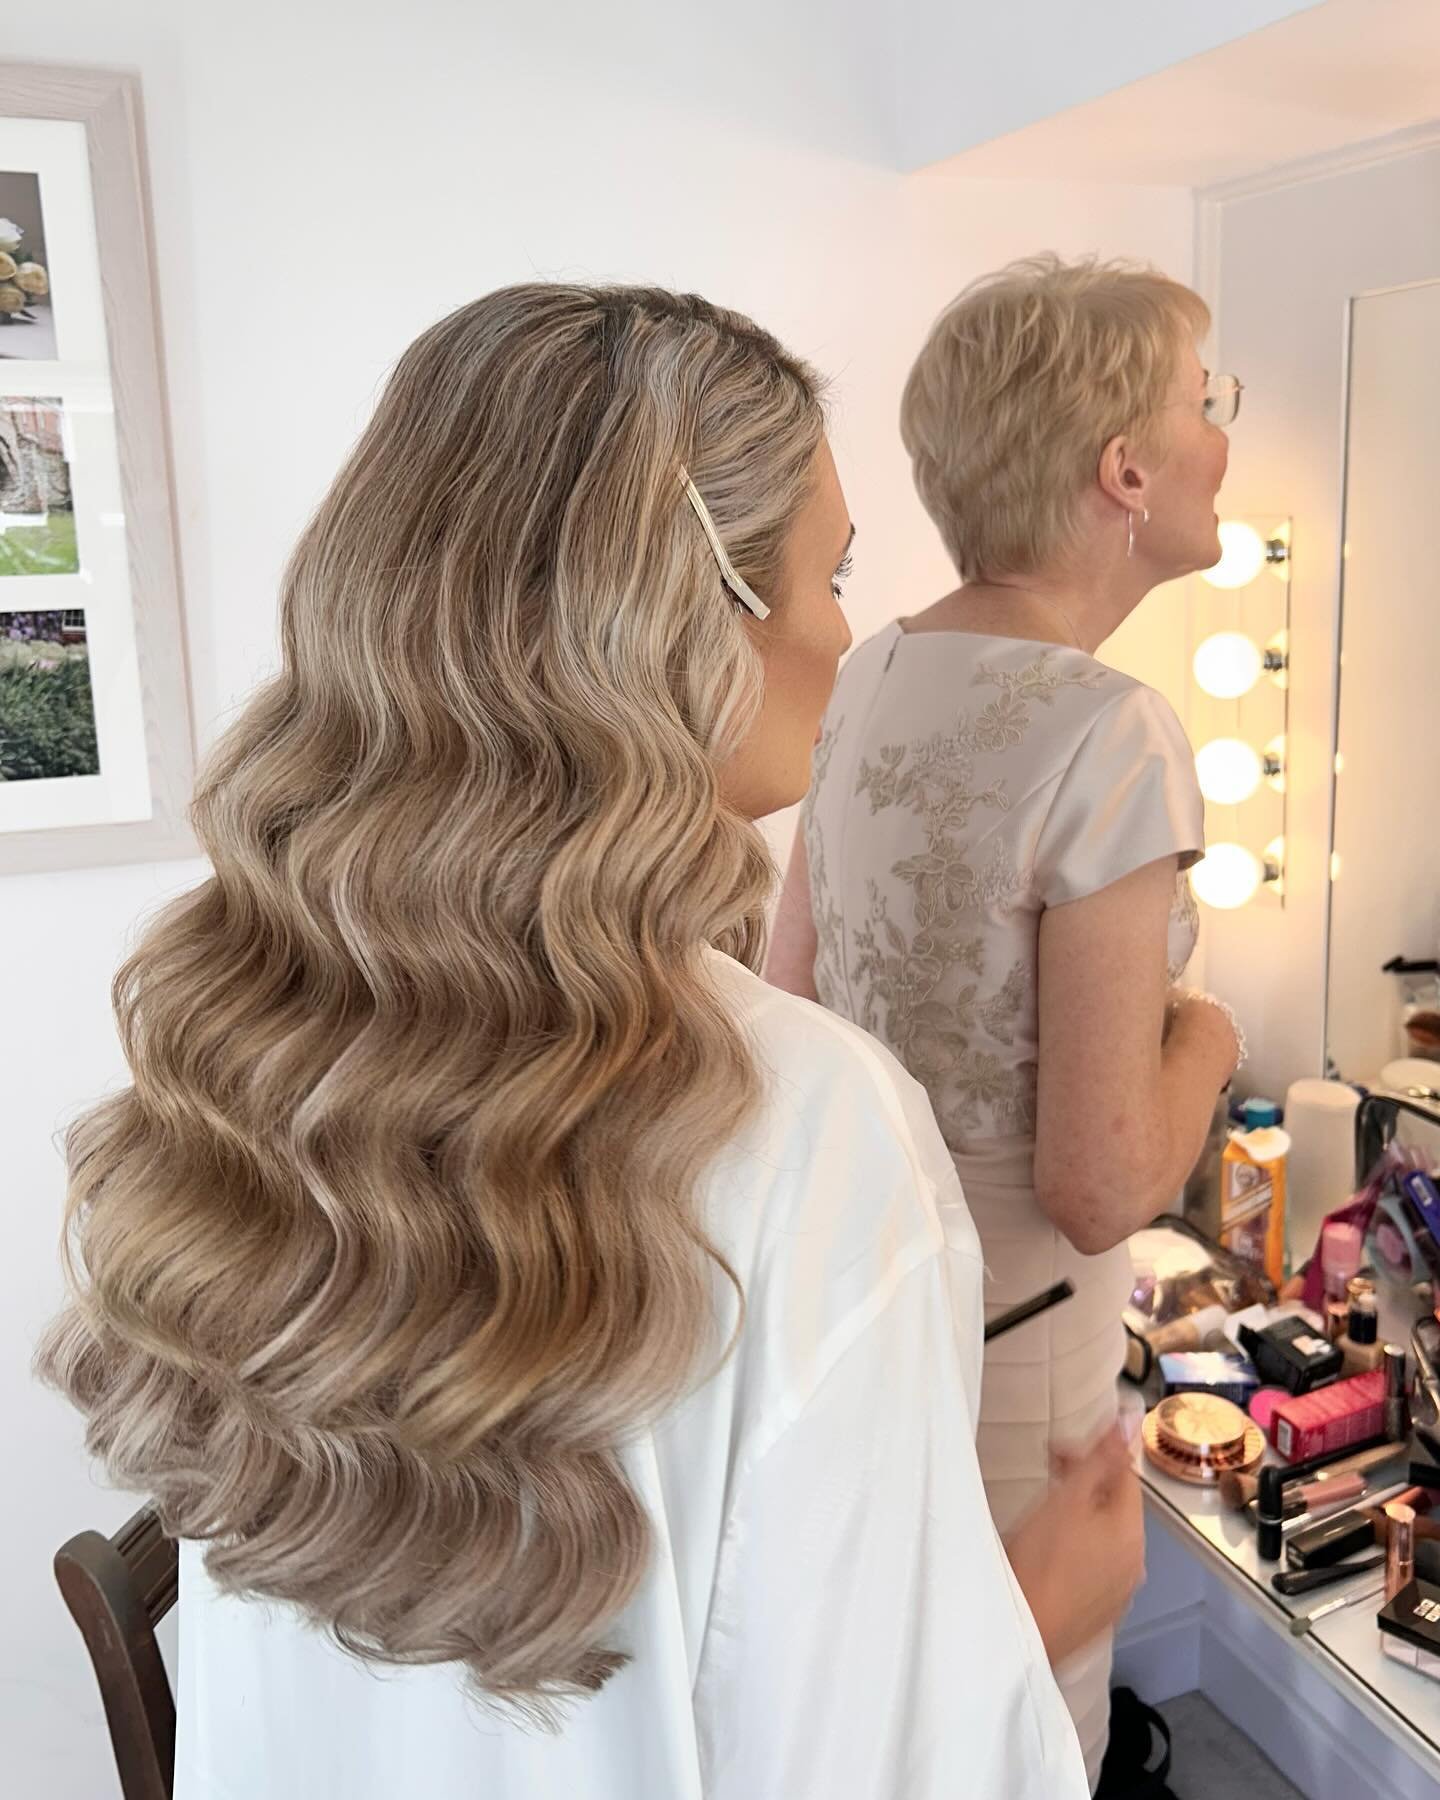 Hollywood Wave &hellip;.. still a big favourite of mine , hair extensions are a must for this beautiful hairstyle 🔥
@hedinghamcastle . 

SAVE &amp; COMMENT 💥

#sexyhairstyle #elegance #bridalhairessex #bridalhair #hollywoodwavesspecialist #longhair